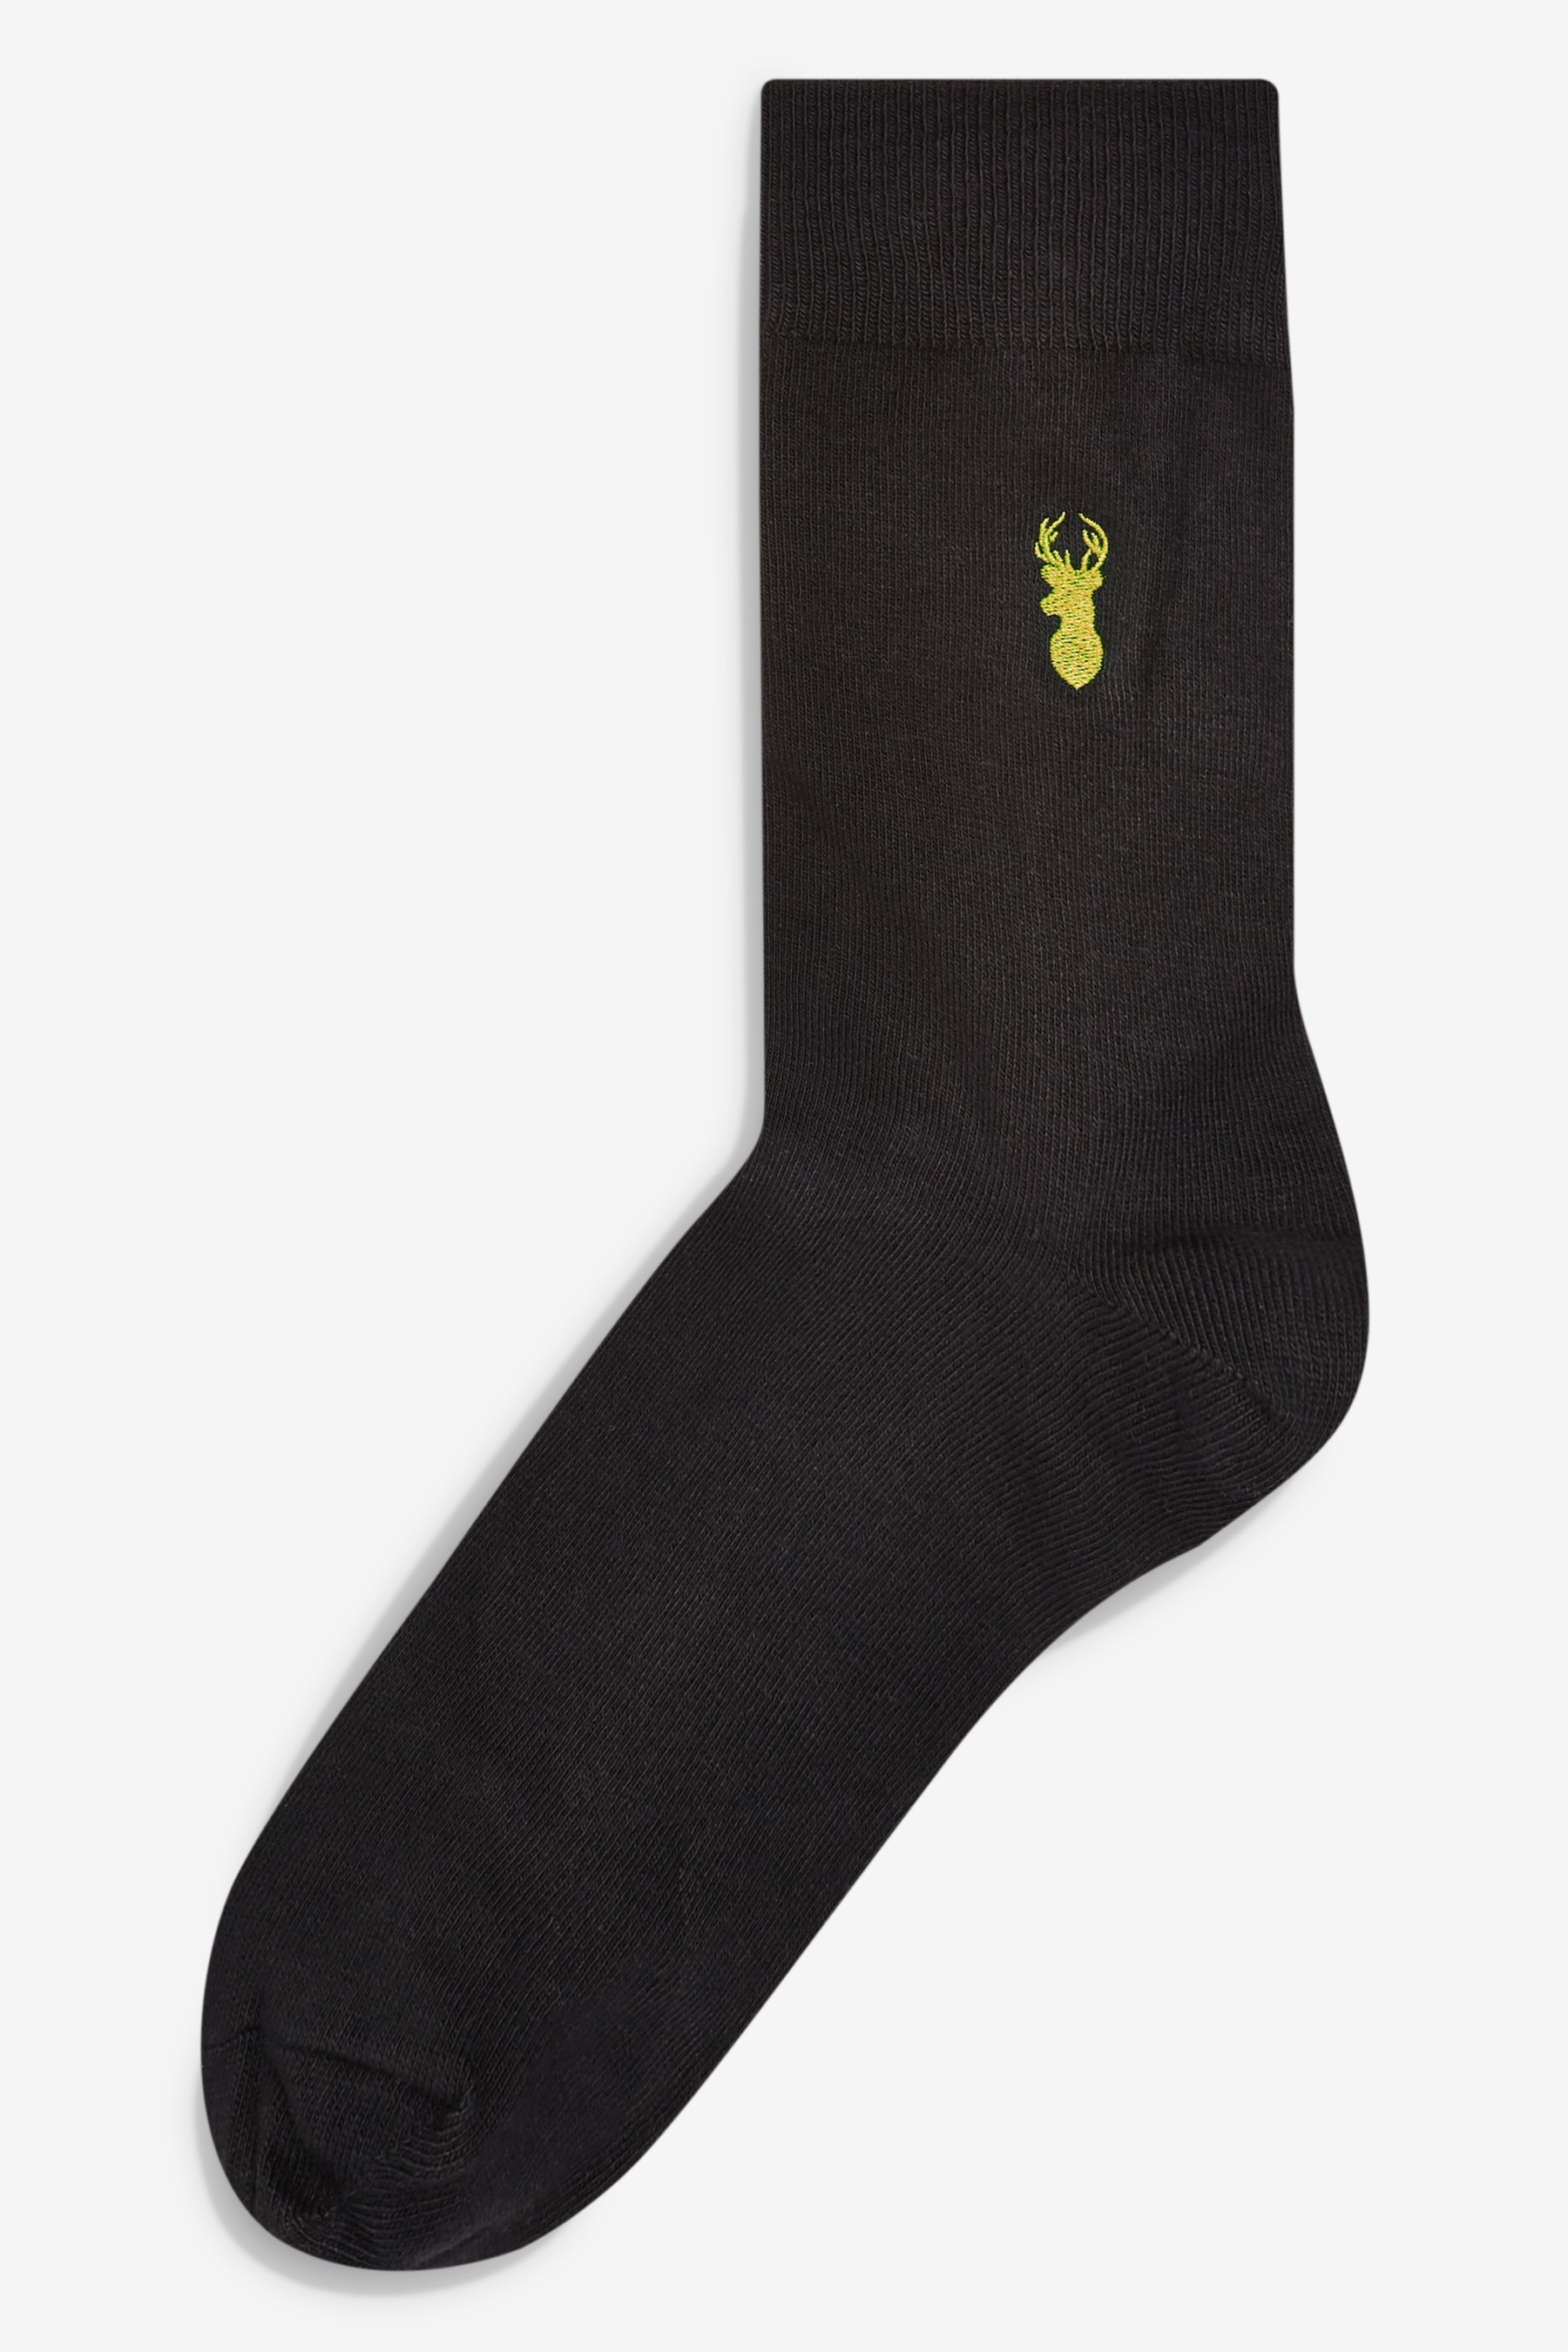 Embroidered Stag Socks 8 Pack